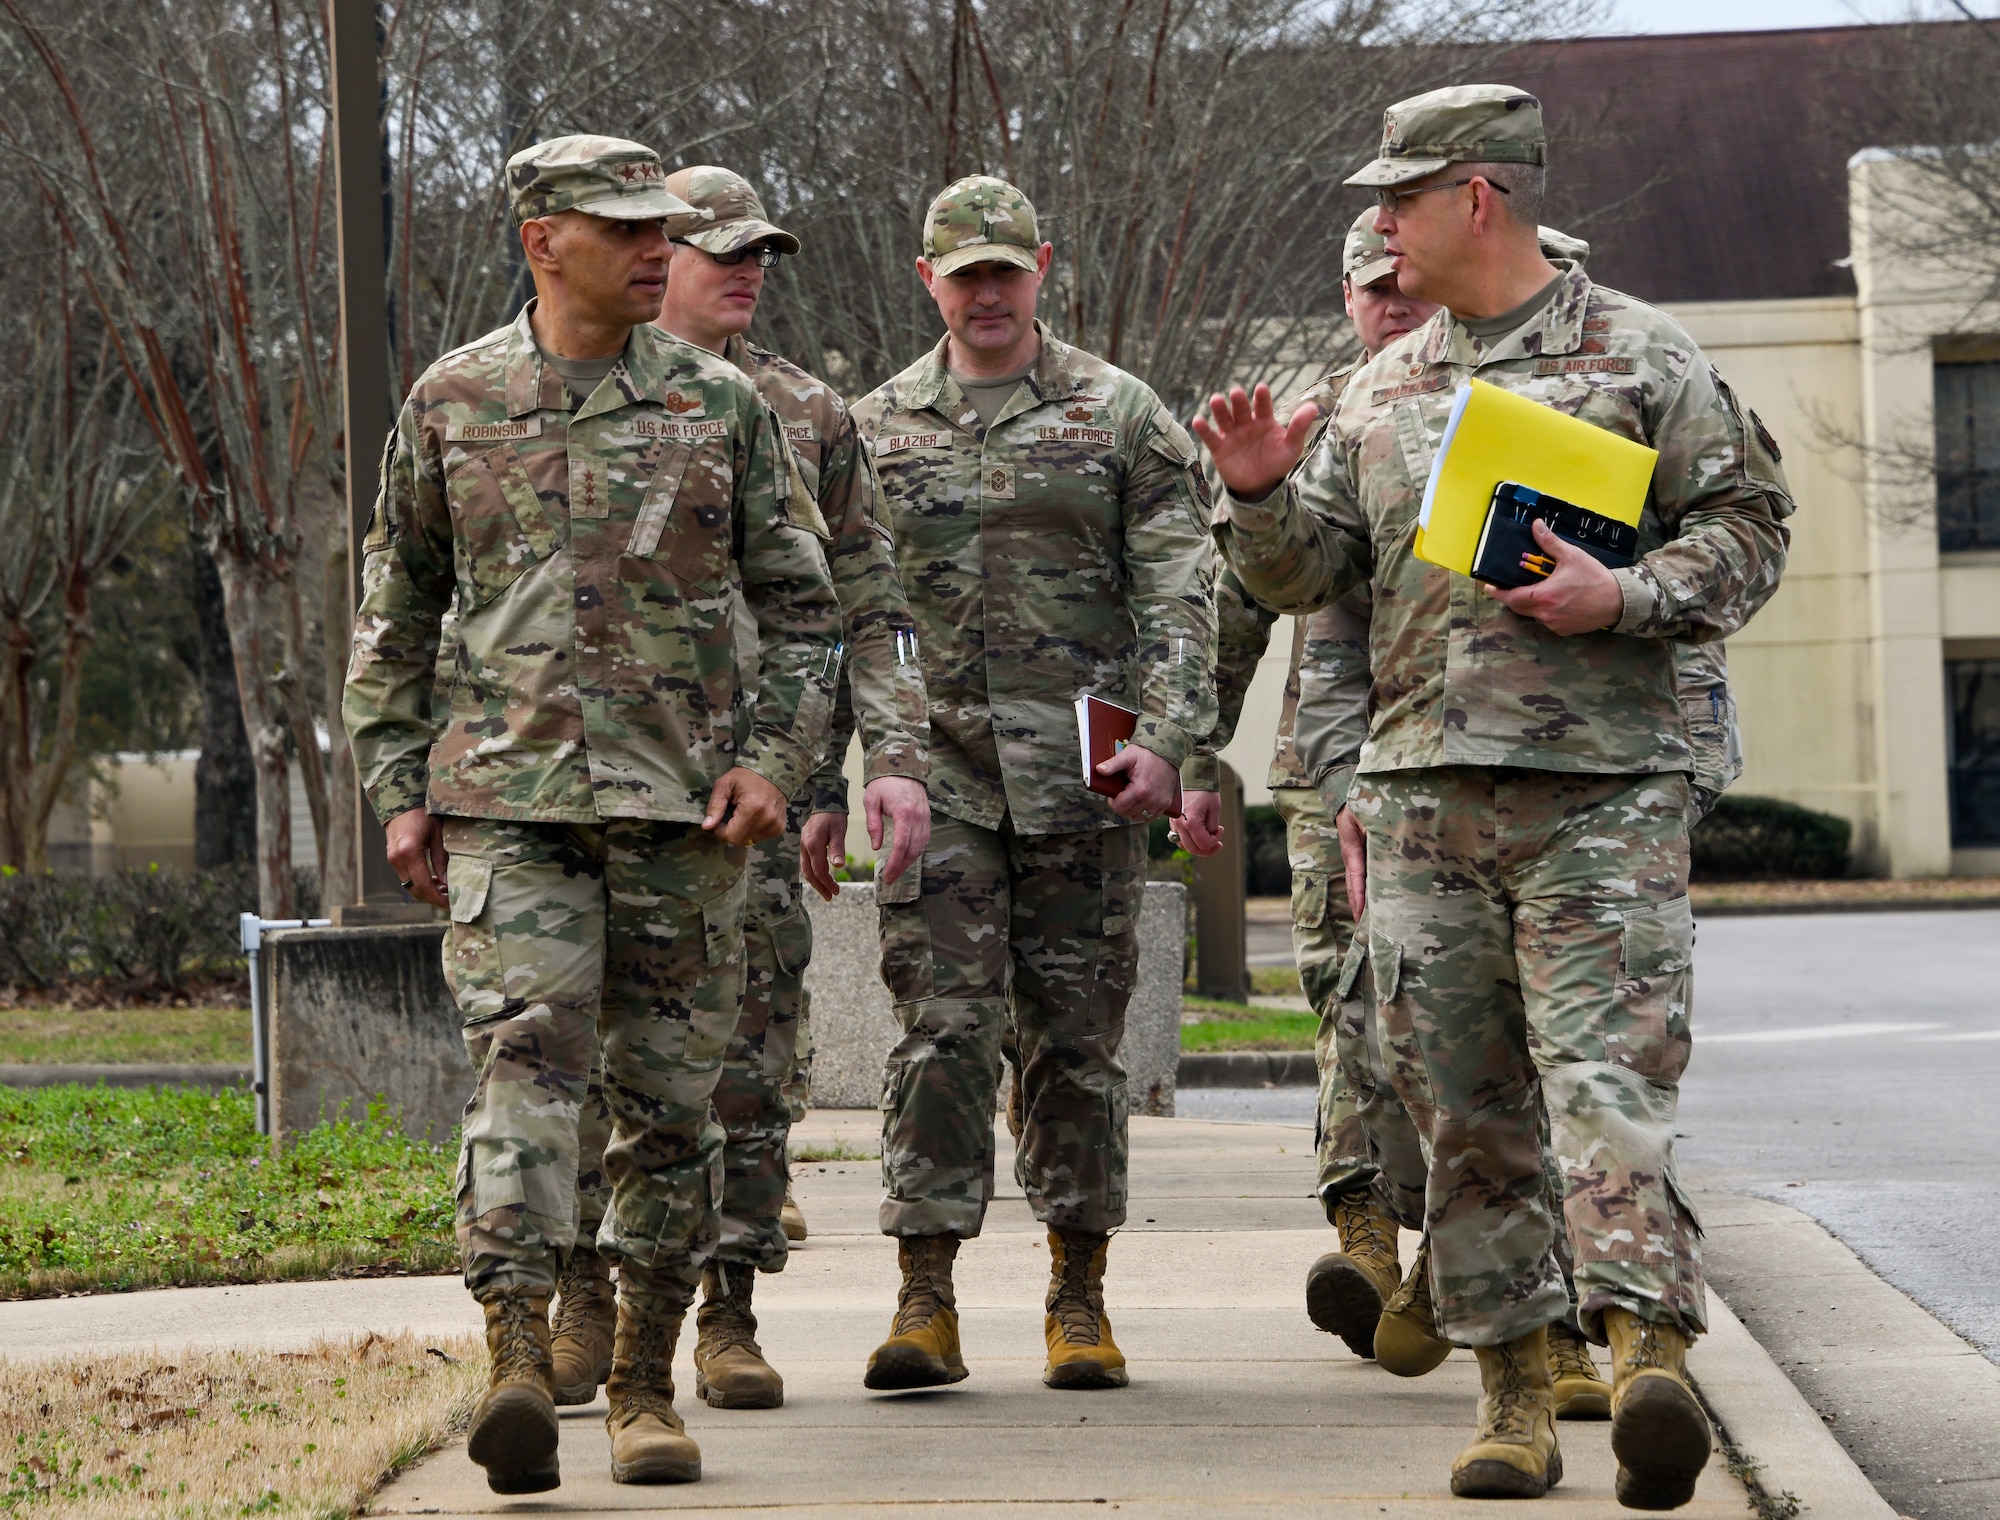 Lt. Gen. Brian Robinson, commander of Air Education and Training Command, walks with Col. Anthony Babcock, Barnes Center for Enlisted Education commander, during a visit to Maxwell Air Force Base, Alabama, Feb. 23, 2023. (U.S. Air Force photo by Brian Ferguson)